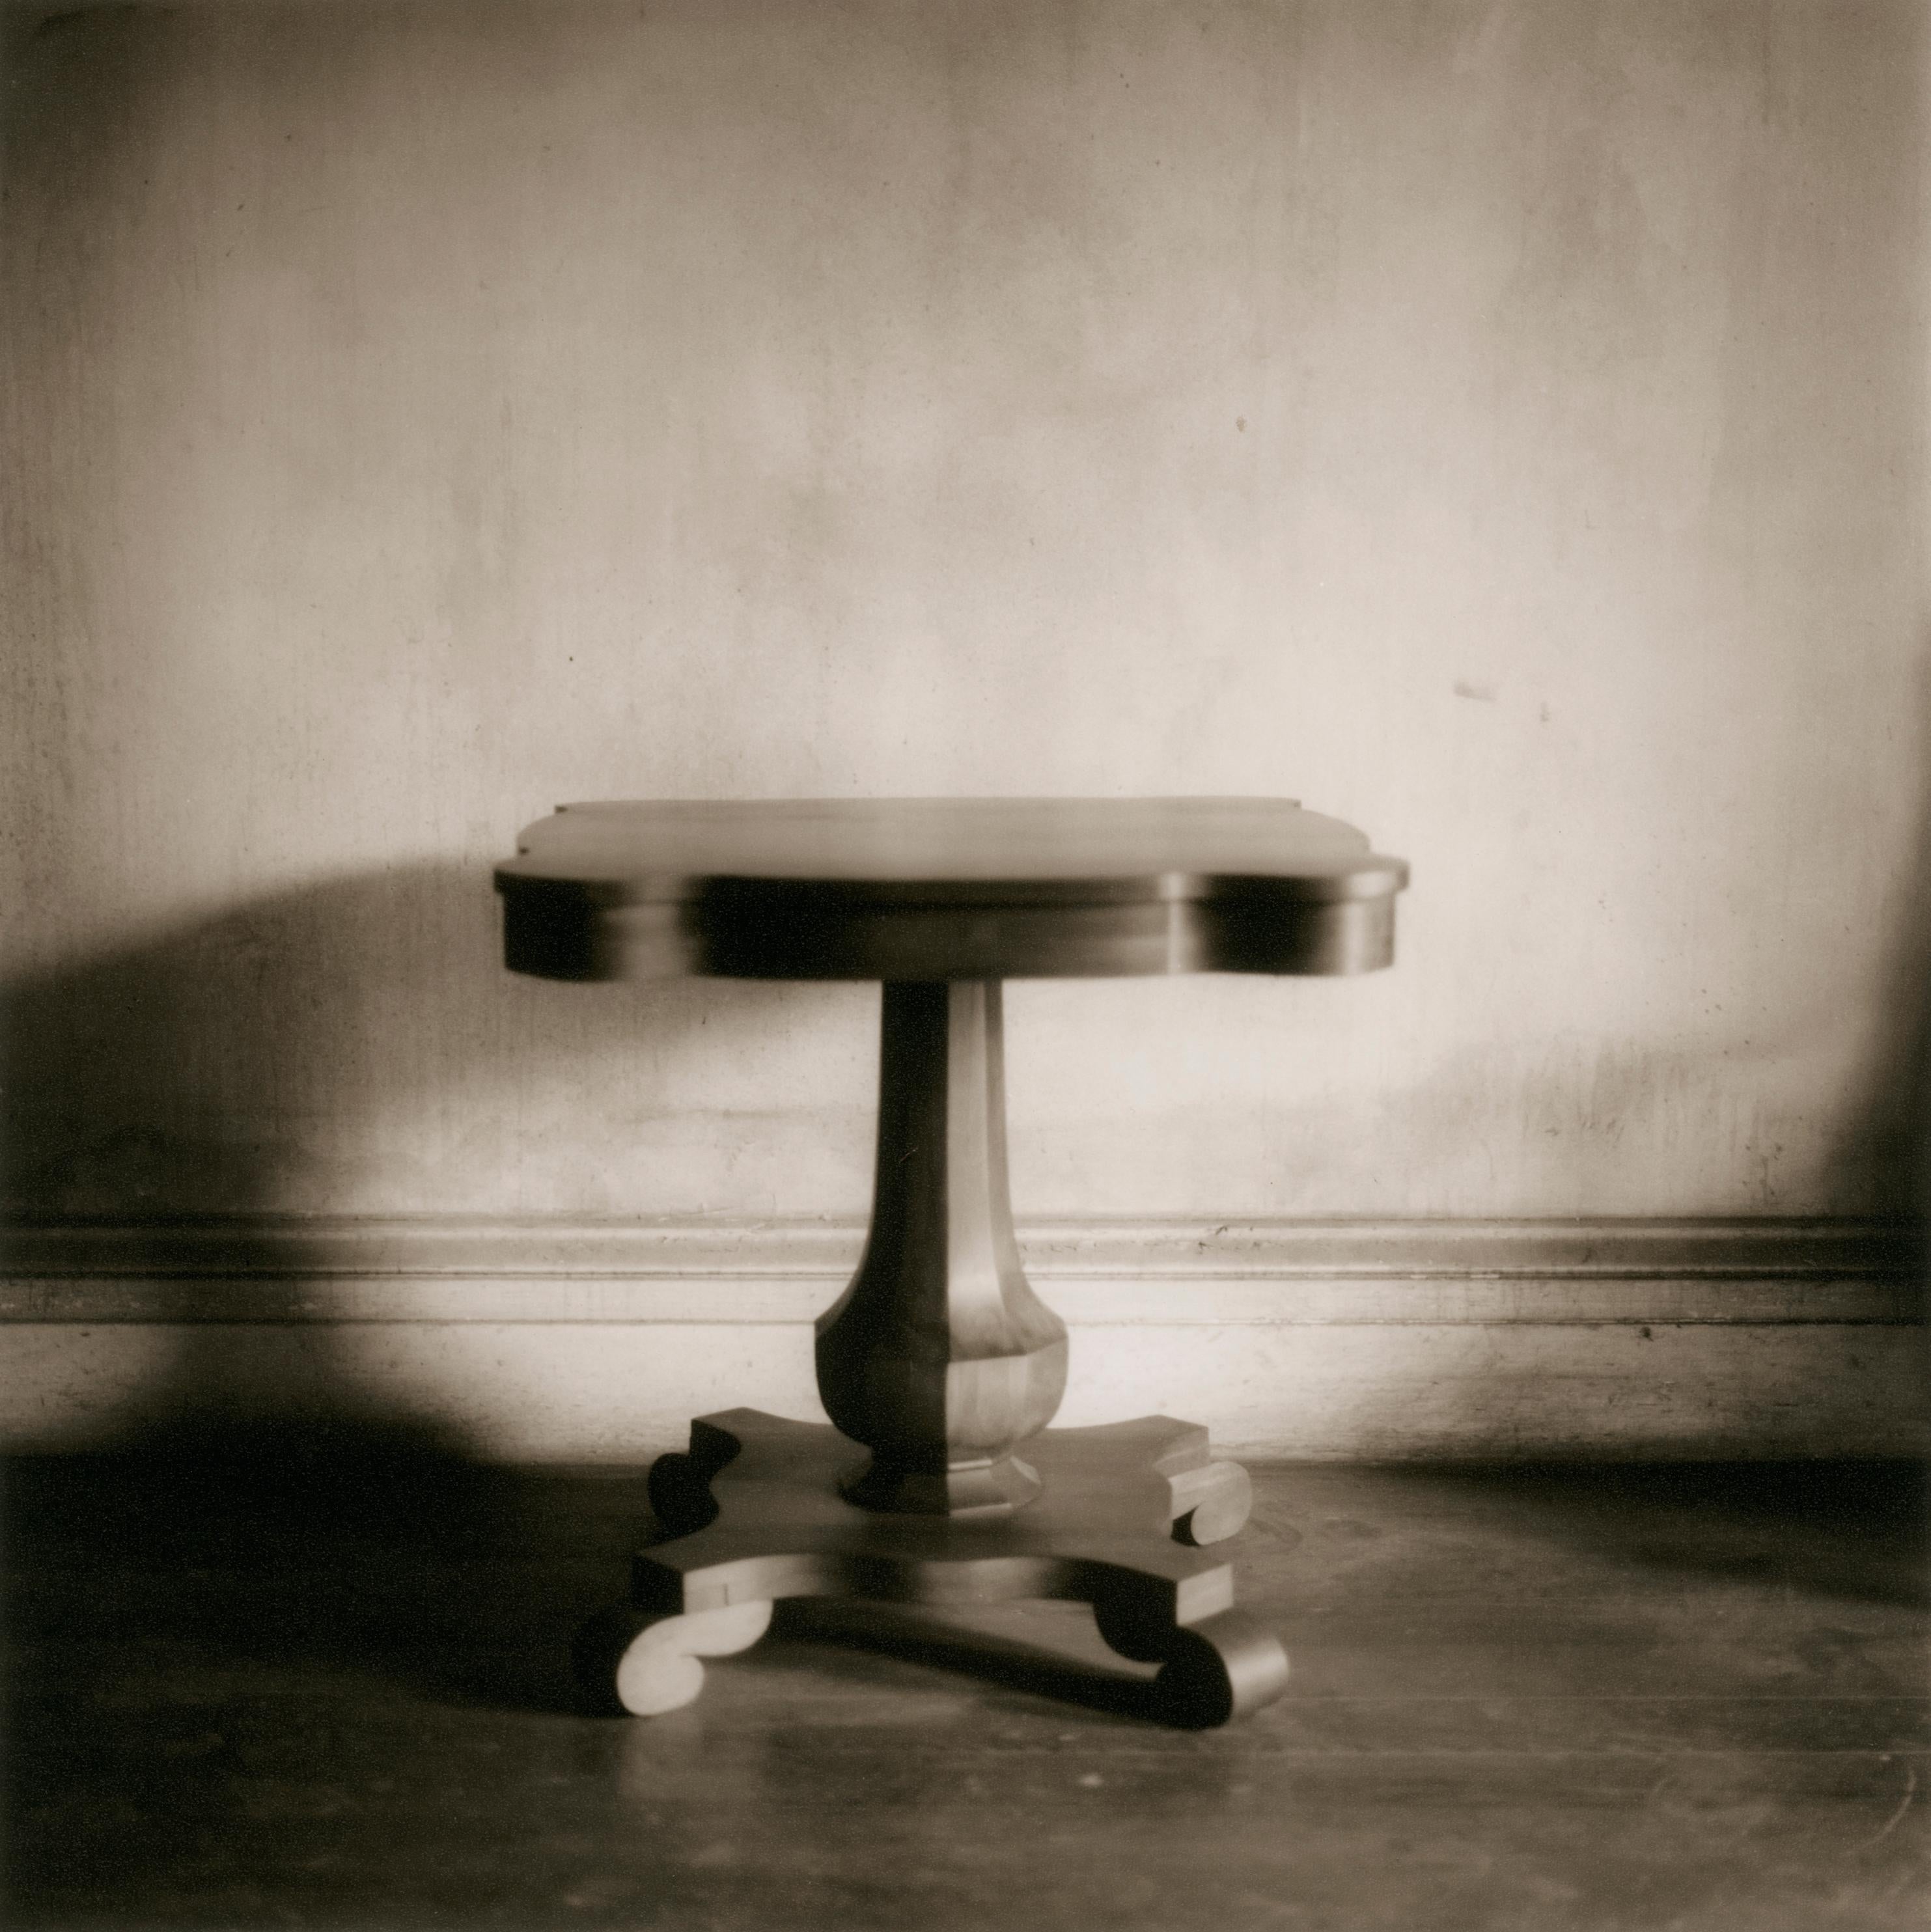 Square Table (Contemporary Sepia Toned Still Life Photograph of Antique Table)